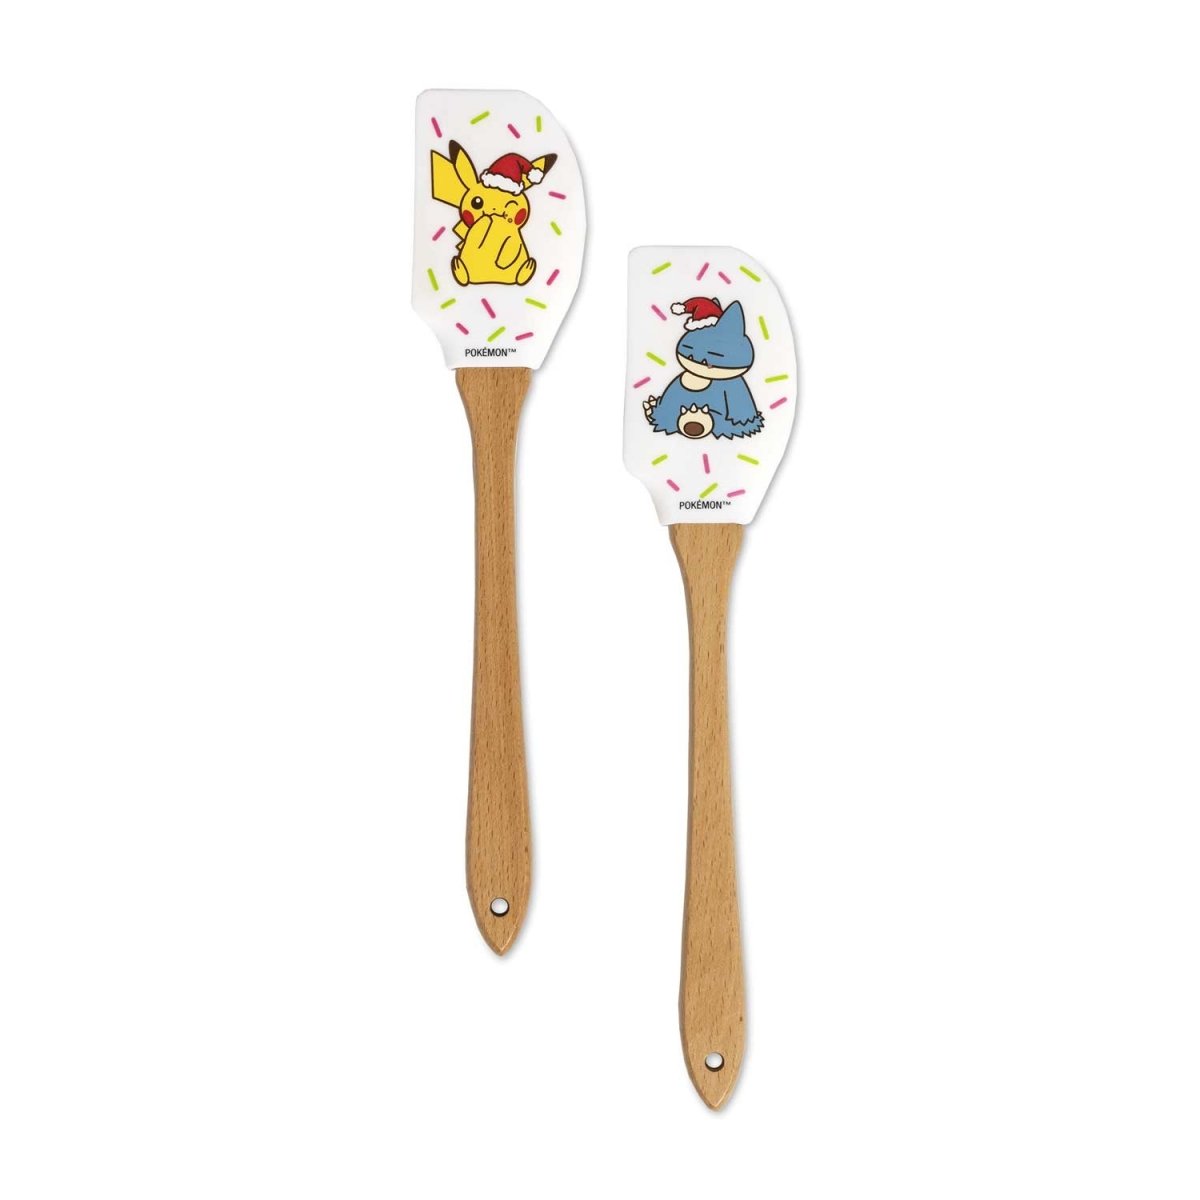 Pikachu Kitchen Measuring Spoons (4-Pack)